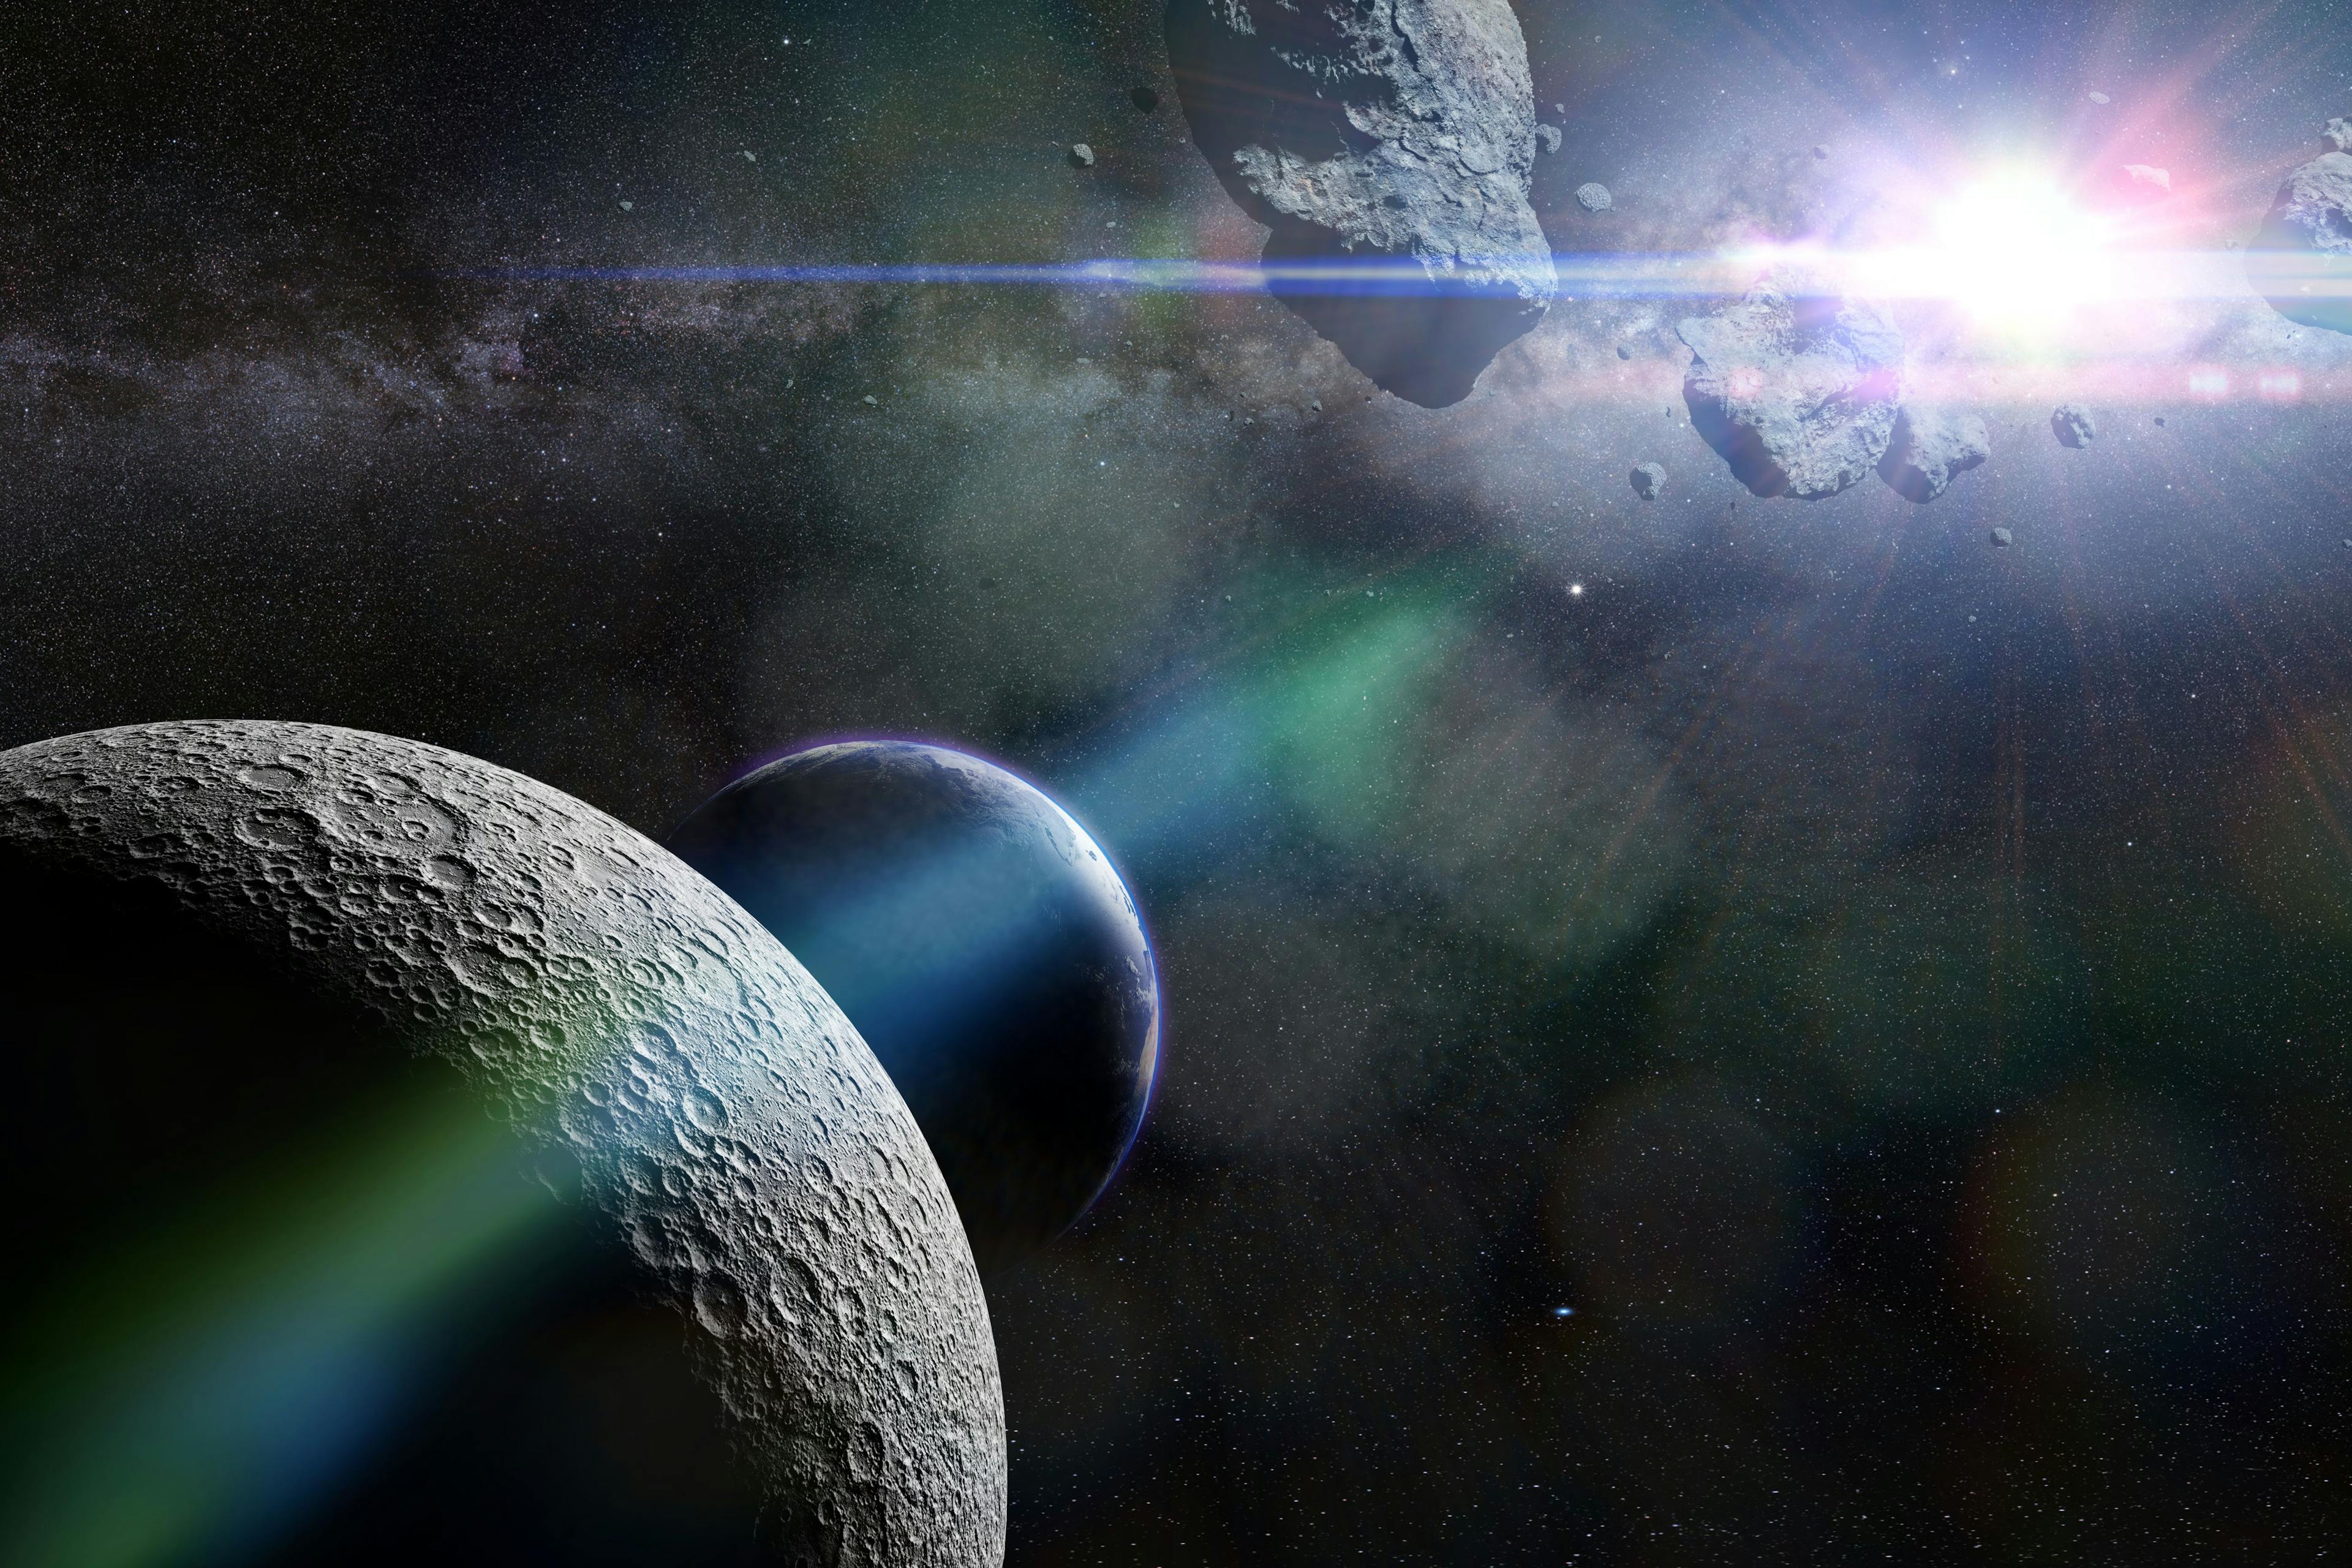 A swarm of asteroids moving towards planet Earth crossing the Moon's orbit | Image Credit: © dottedyeti - stock.adobe.com